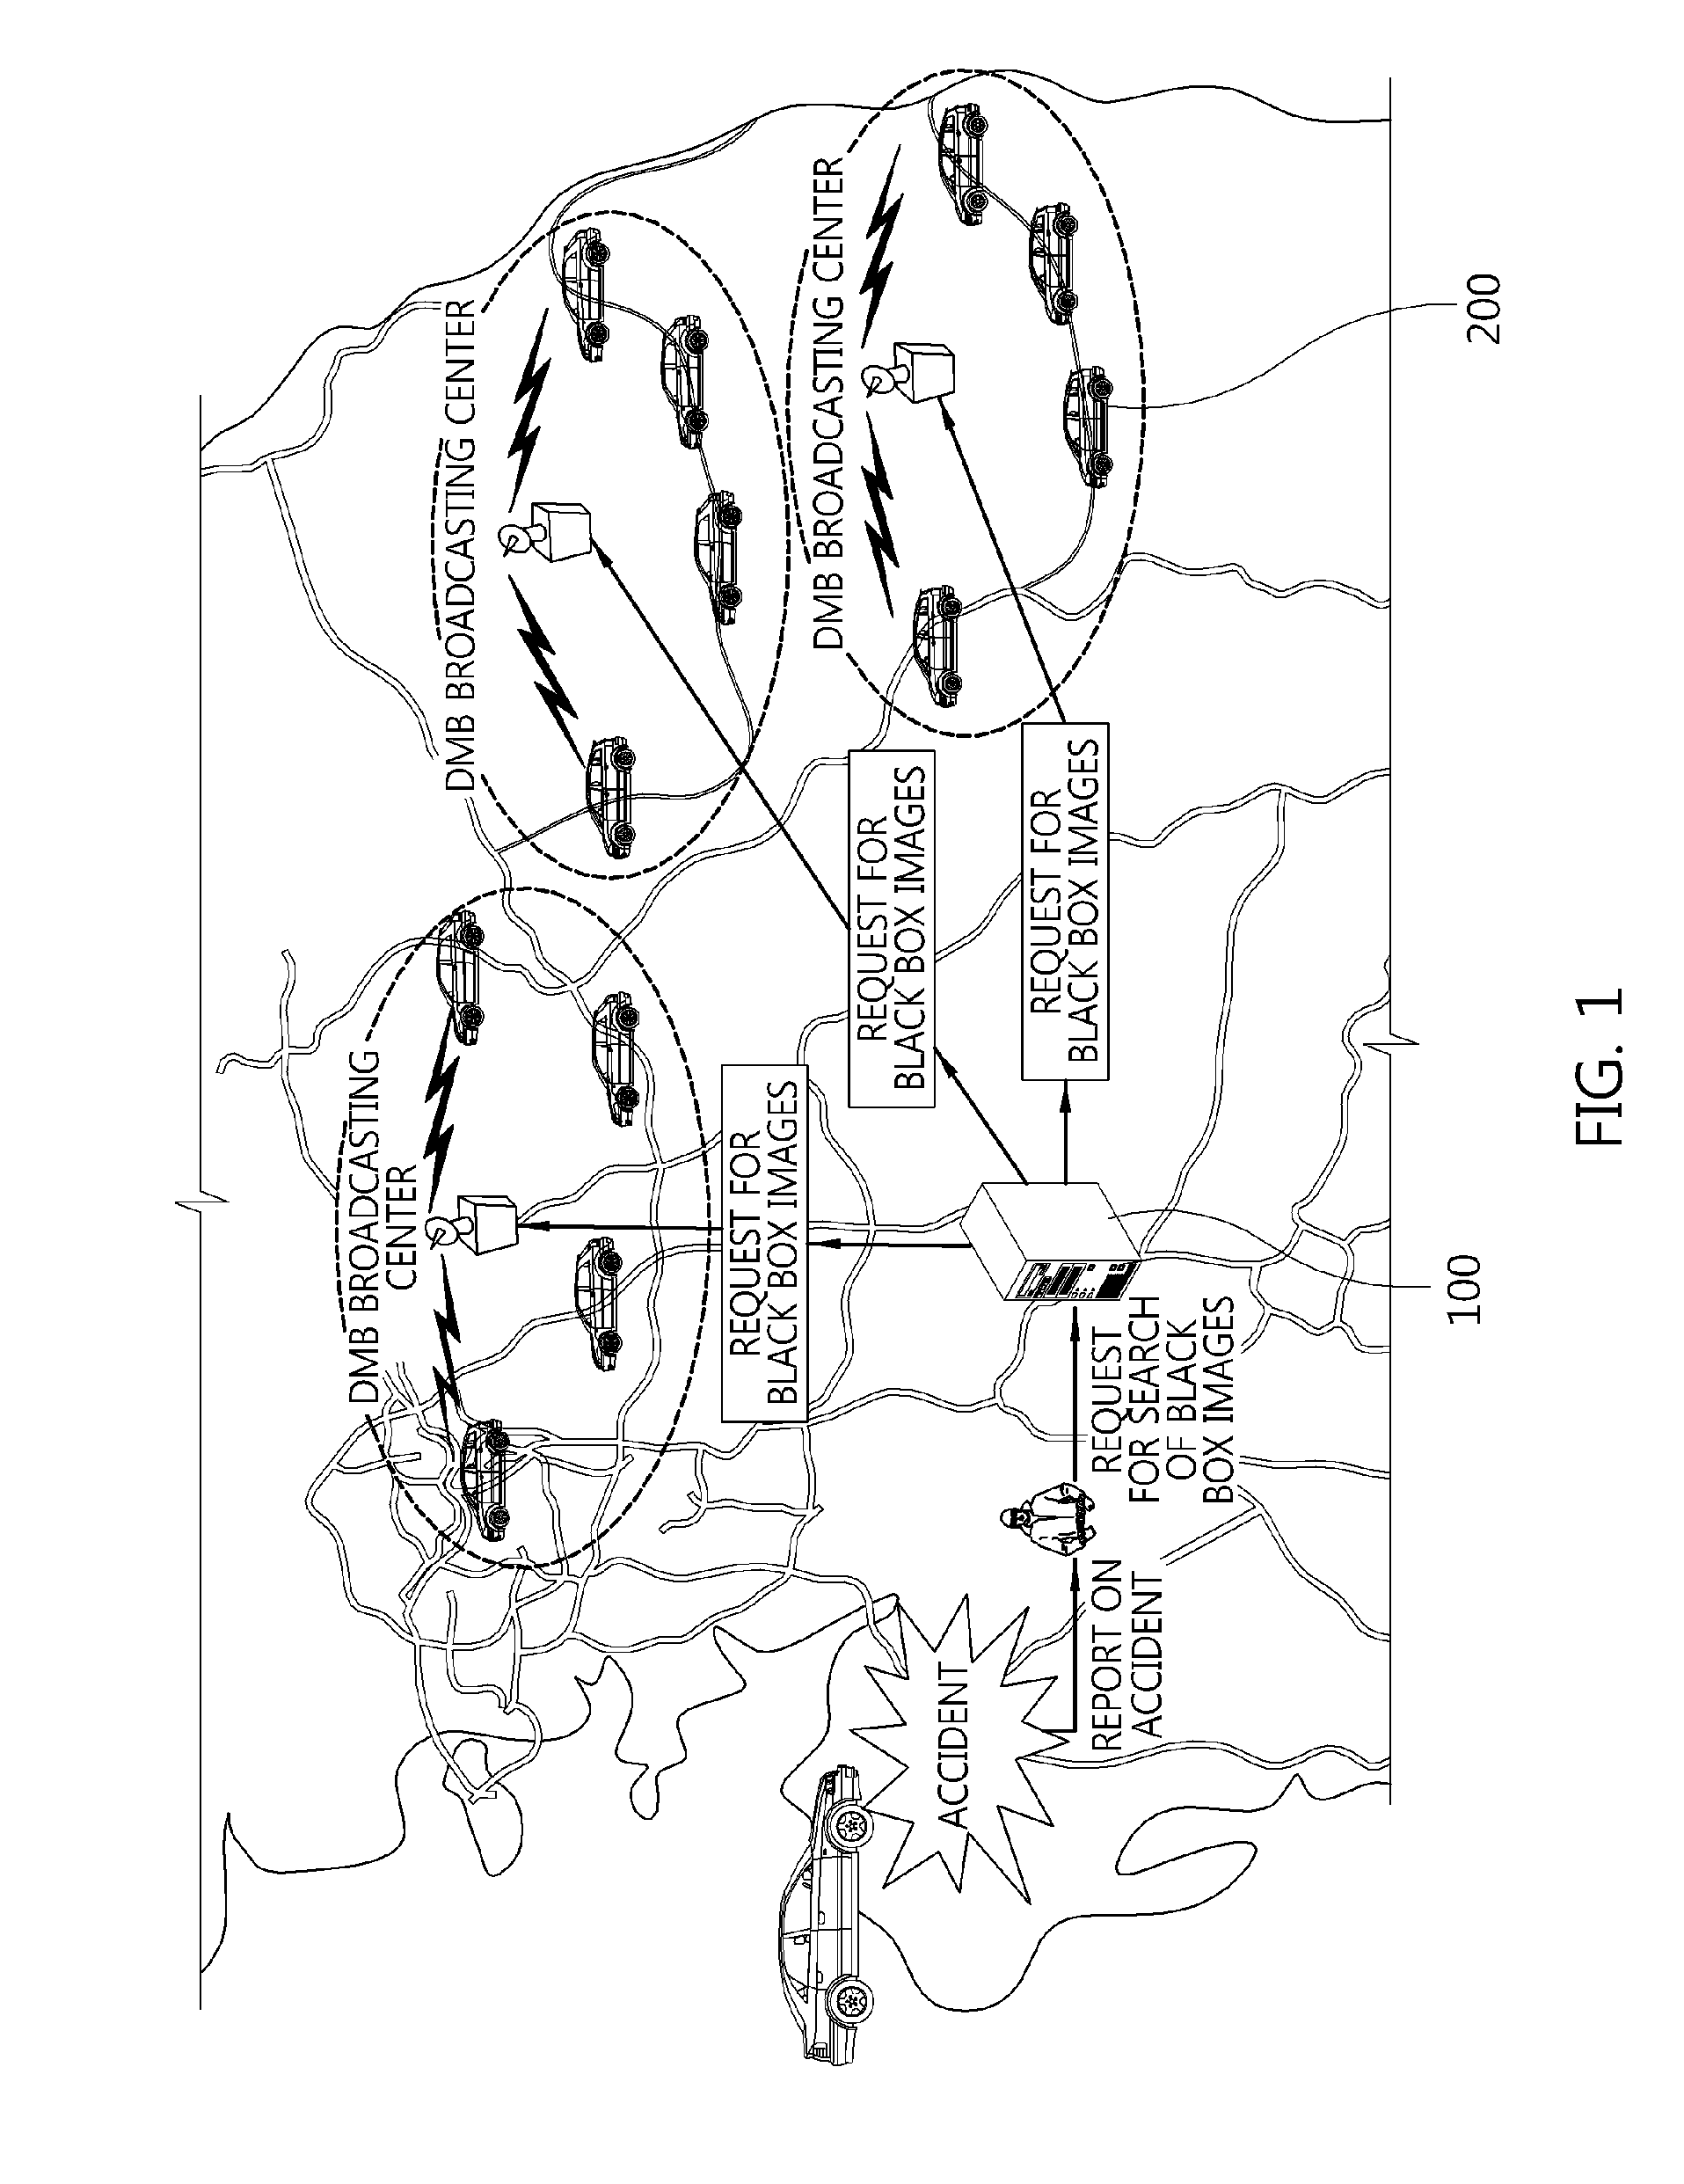 Apparatus for requesting black box images over digital multimedia broadcasting network, and apparatus and method for searching black box images